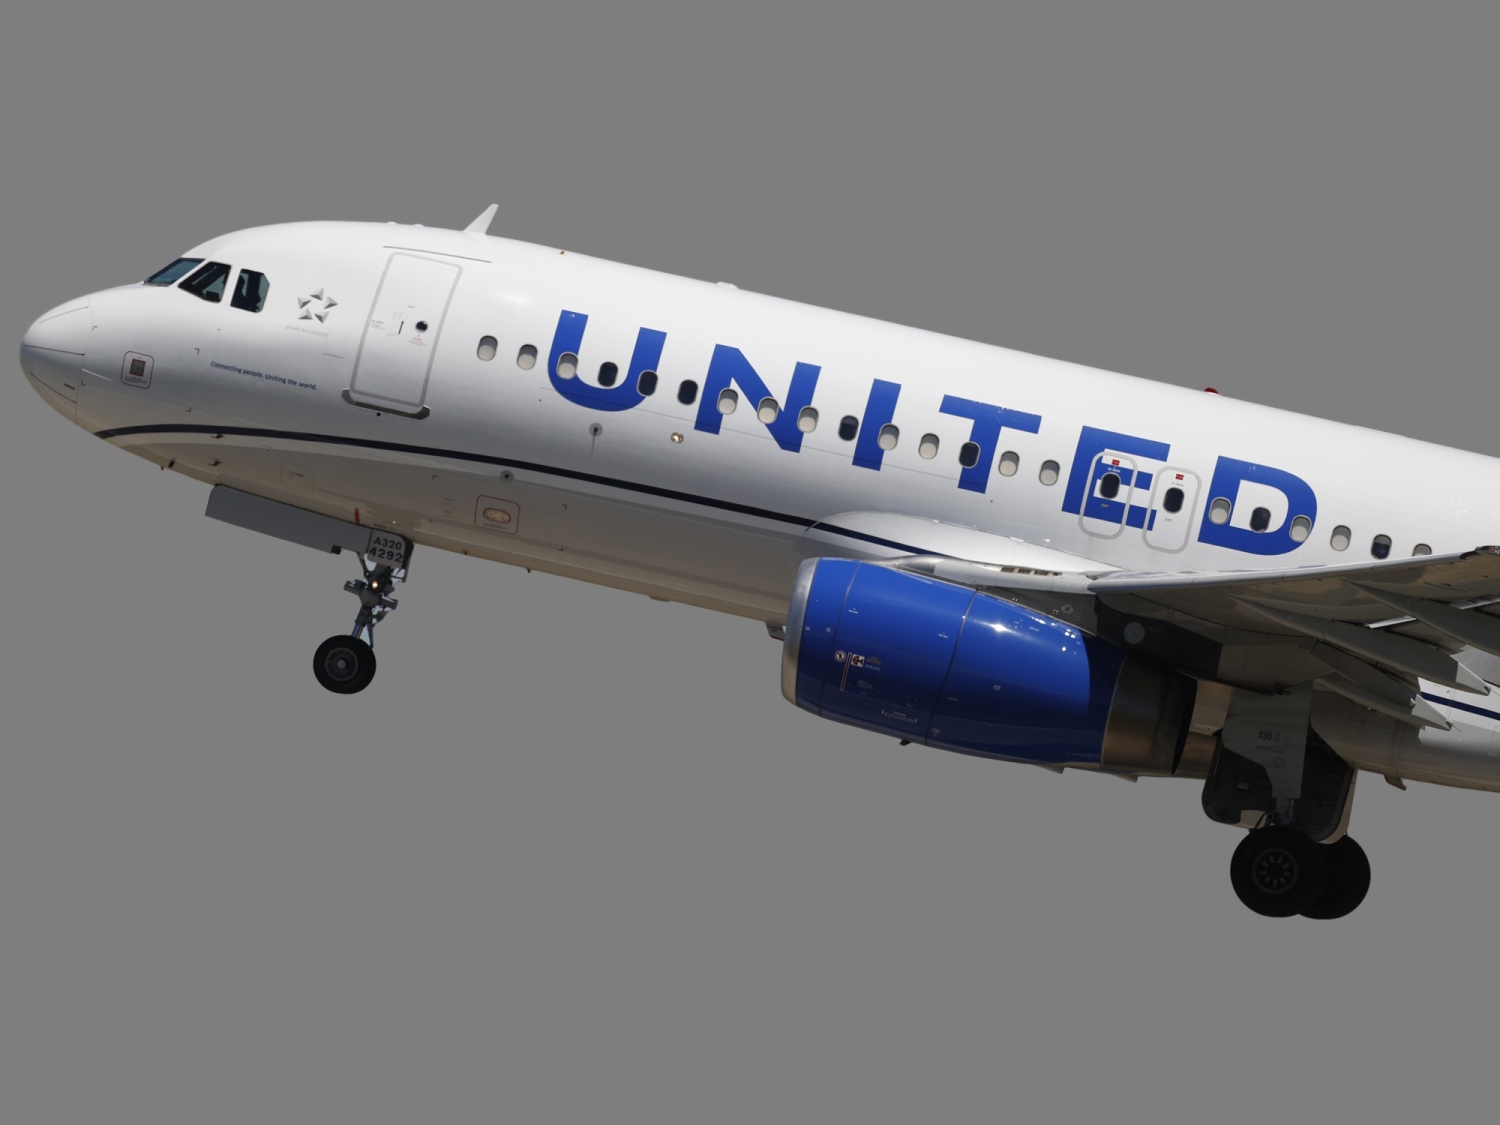 United CFO says Covid’s financial impact was worse than worst case scenario: ‘We were not even close’